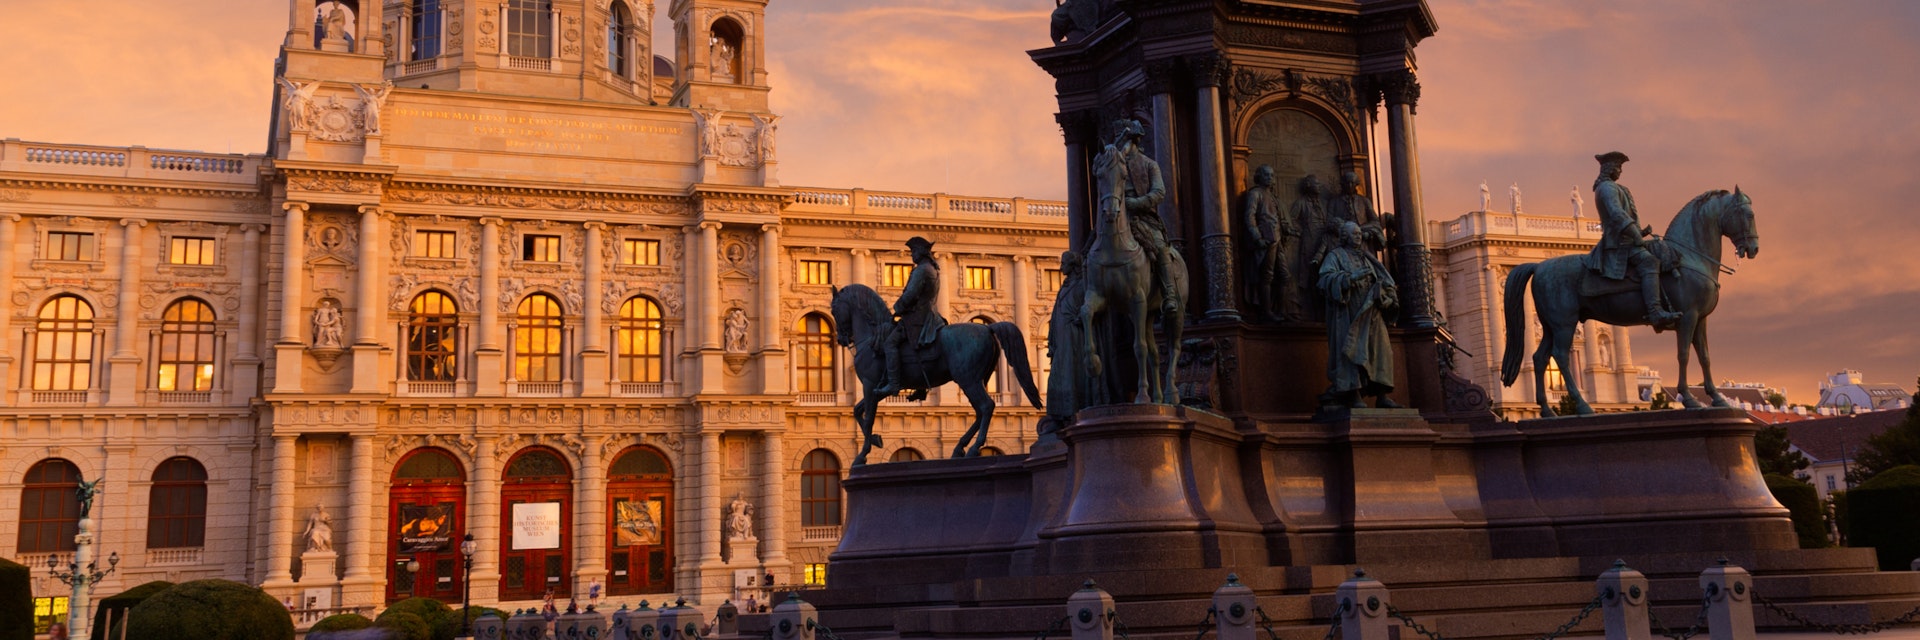 500px Photo ID: 124014183 - The outside of the Kunsthistorisches Museum in Vienna at Sunset